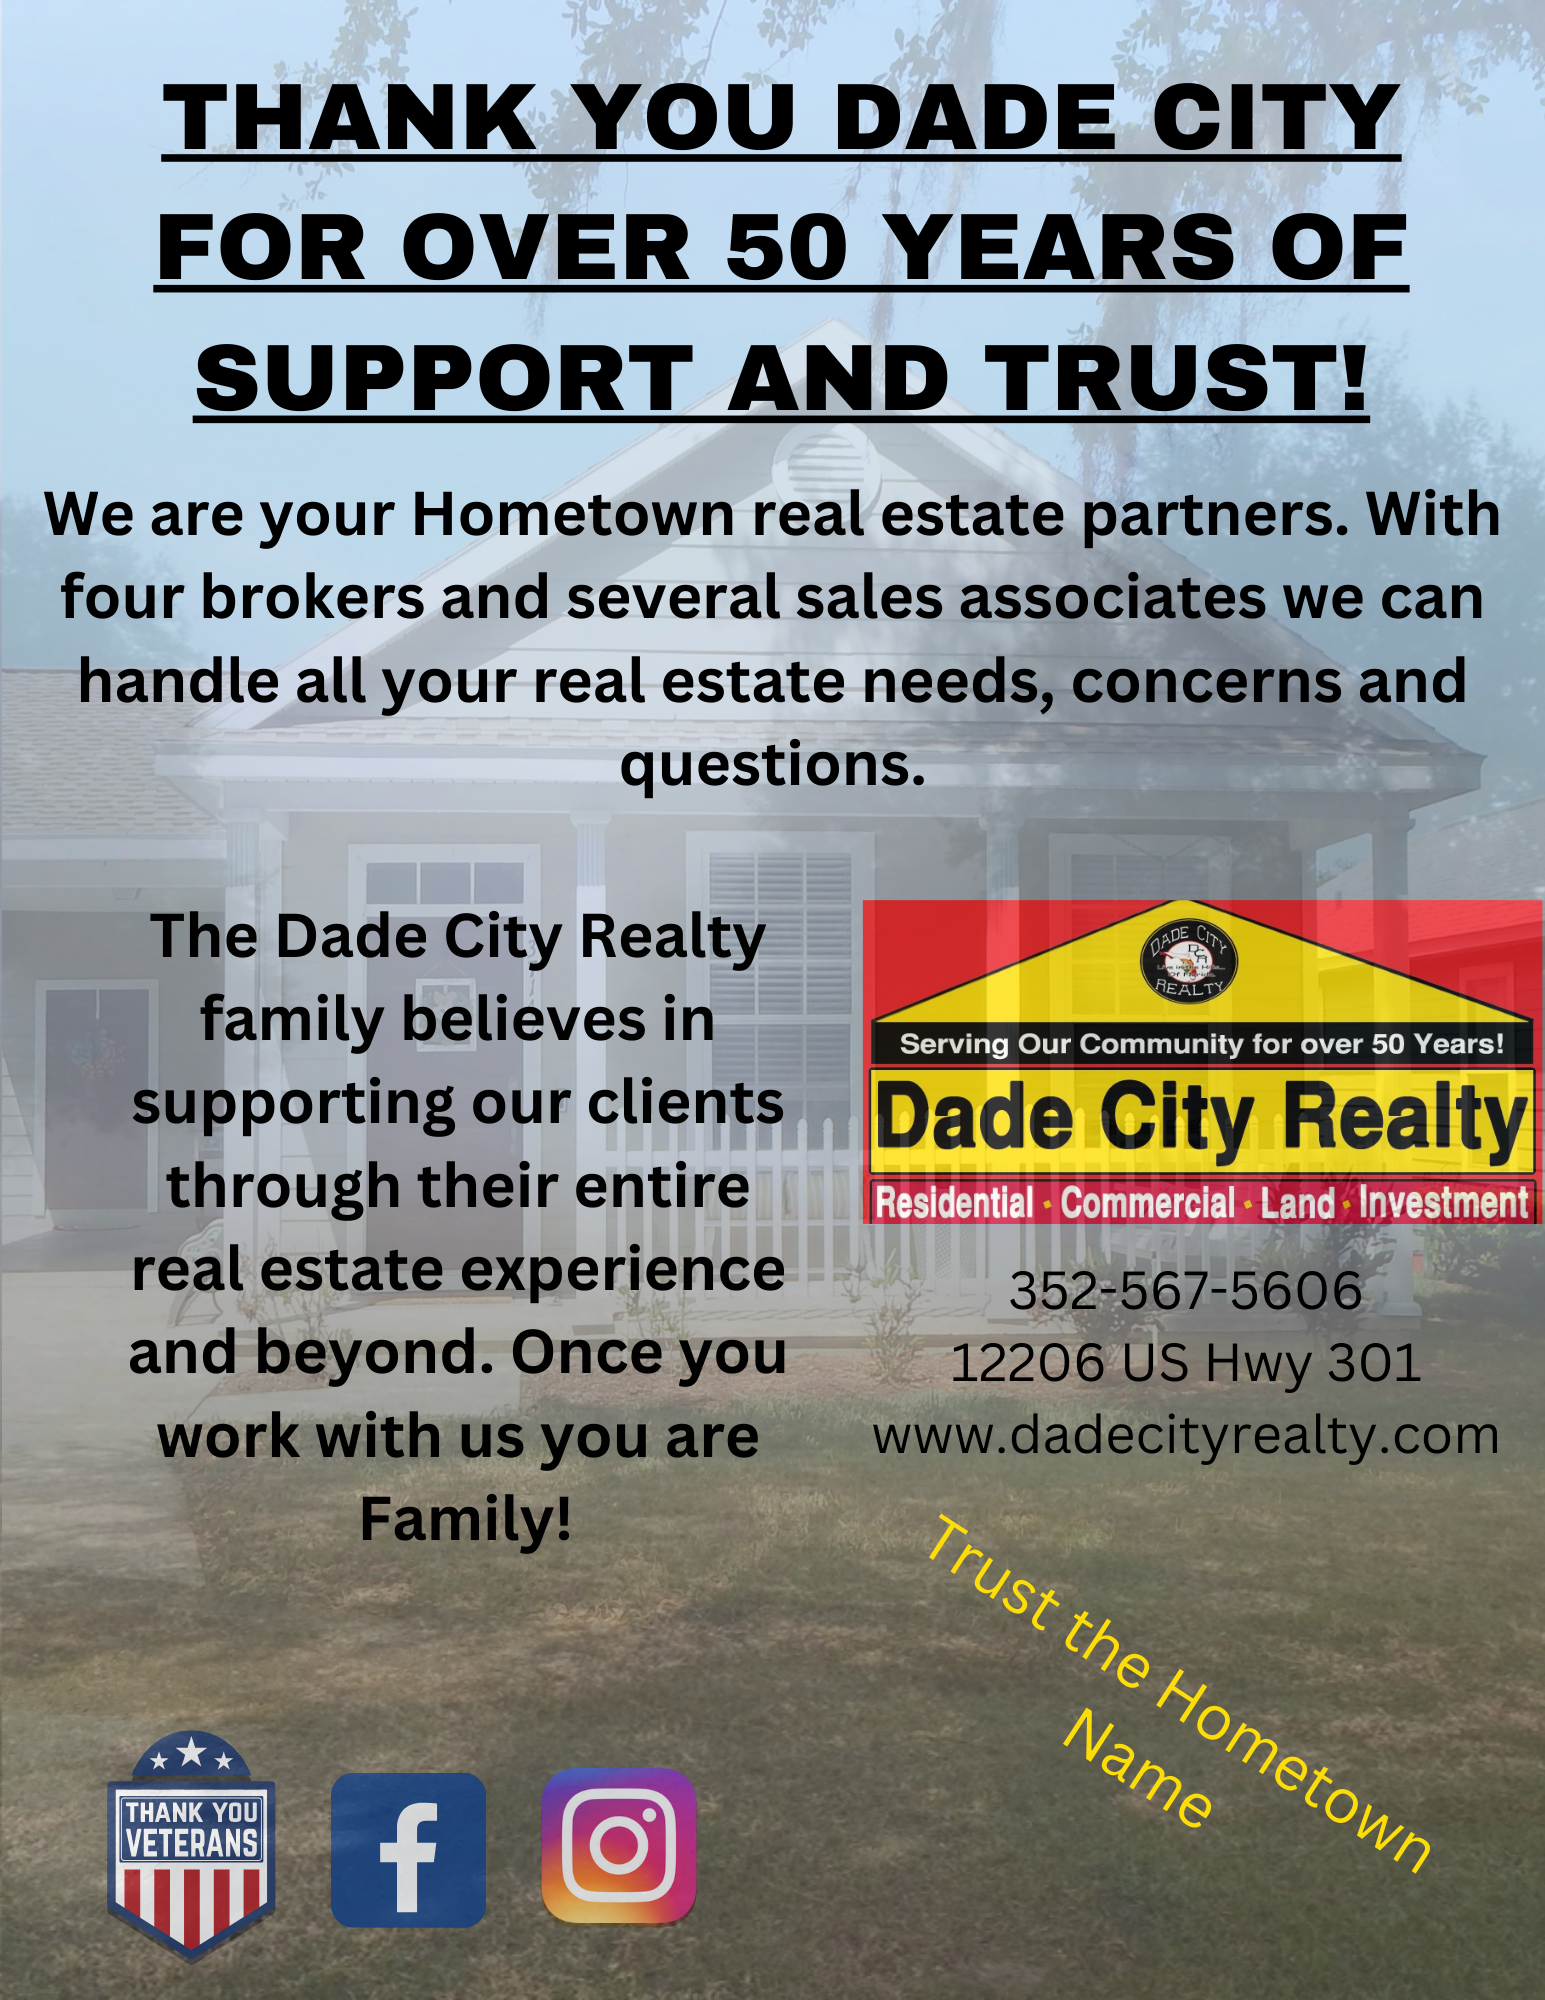 Dade City Realty announcement showing the background of a house with text overlaid on it: "Thank you Dade City for over 50 years of support and trust!"